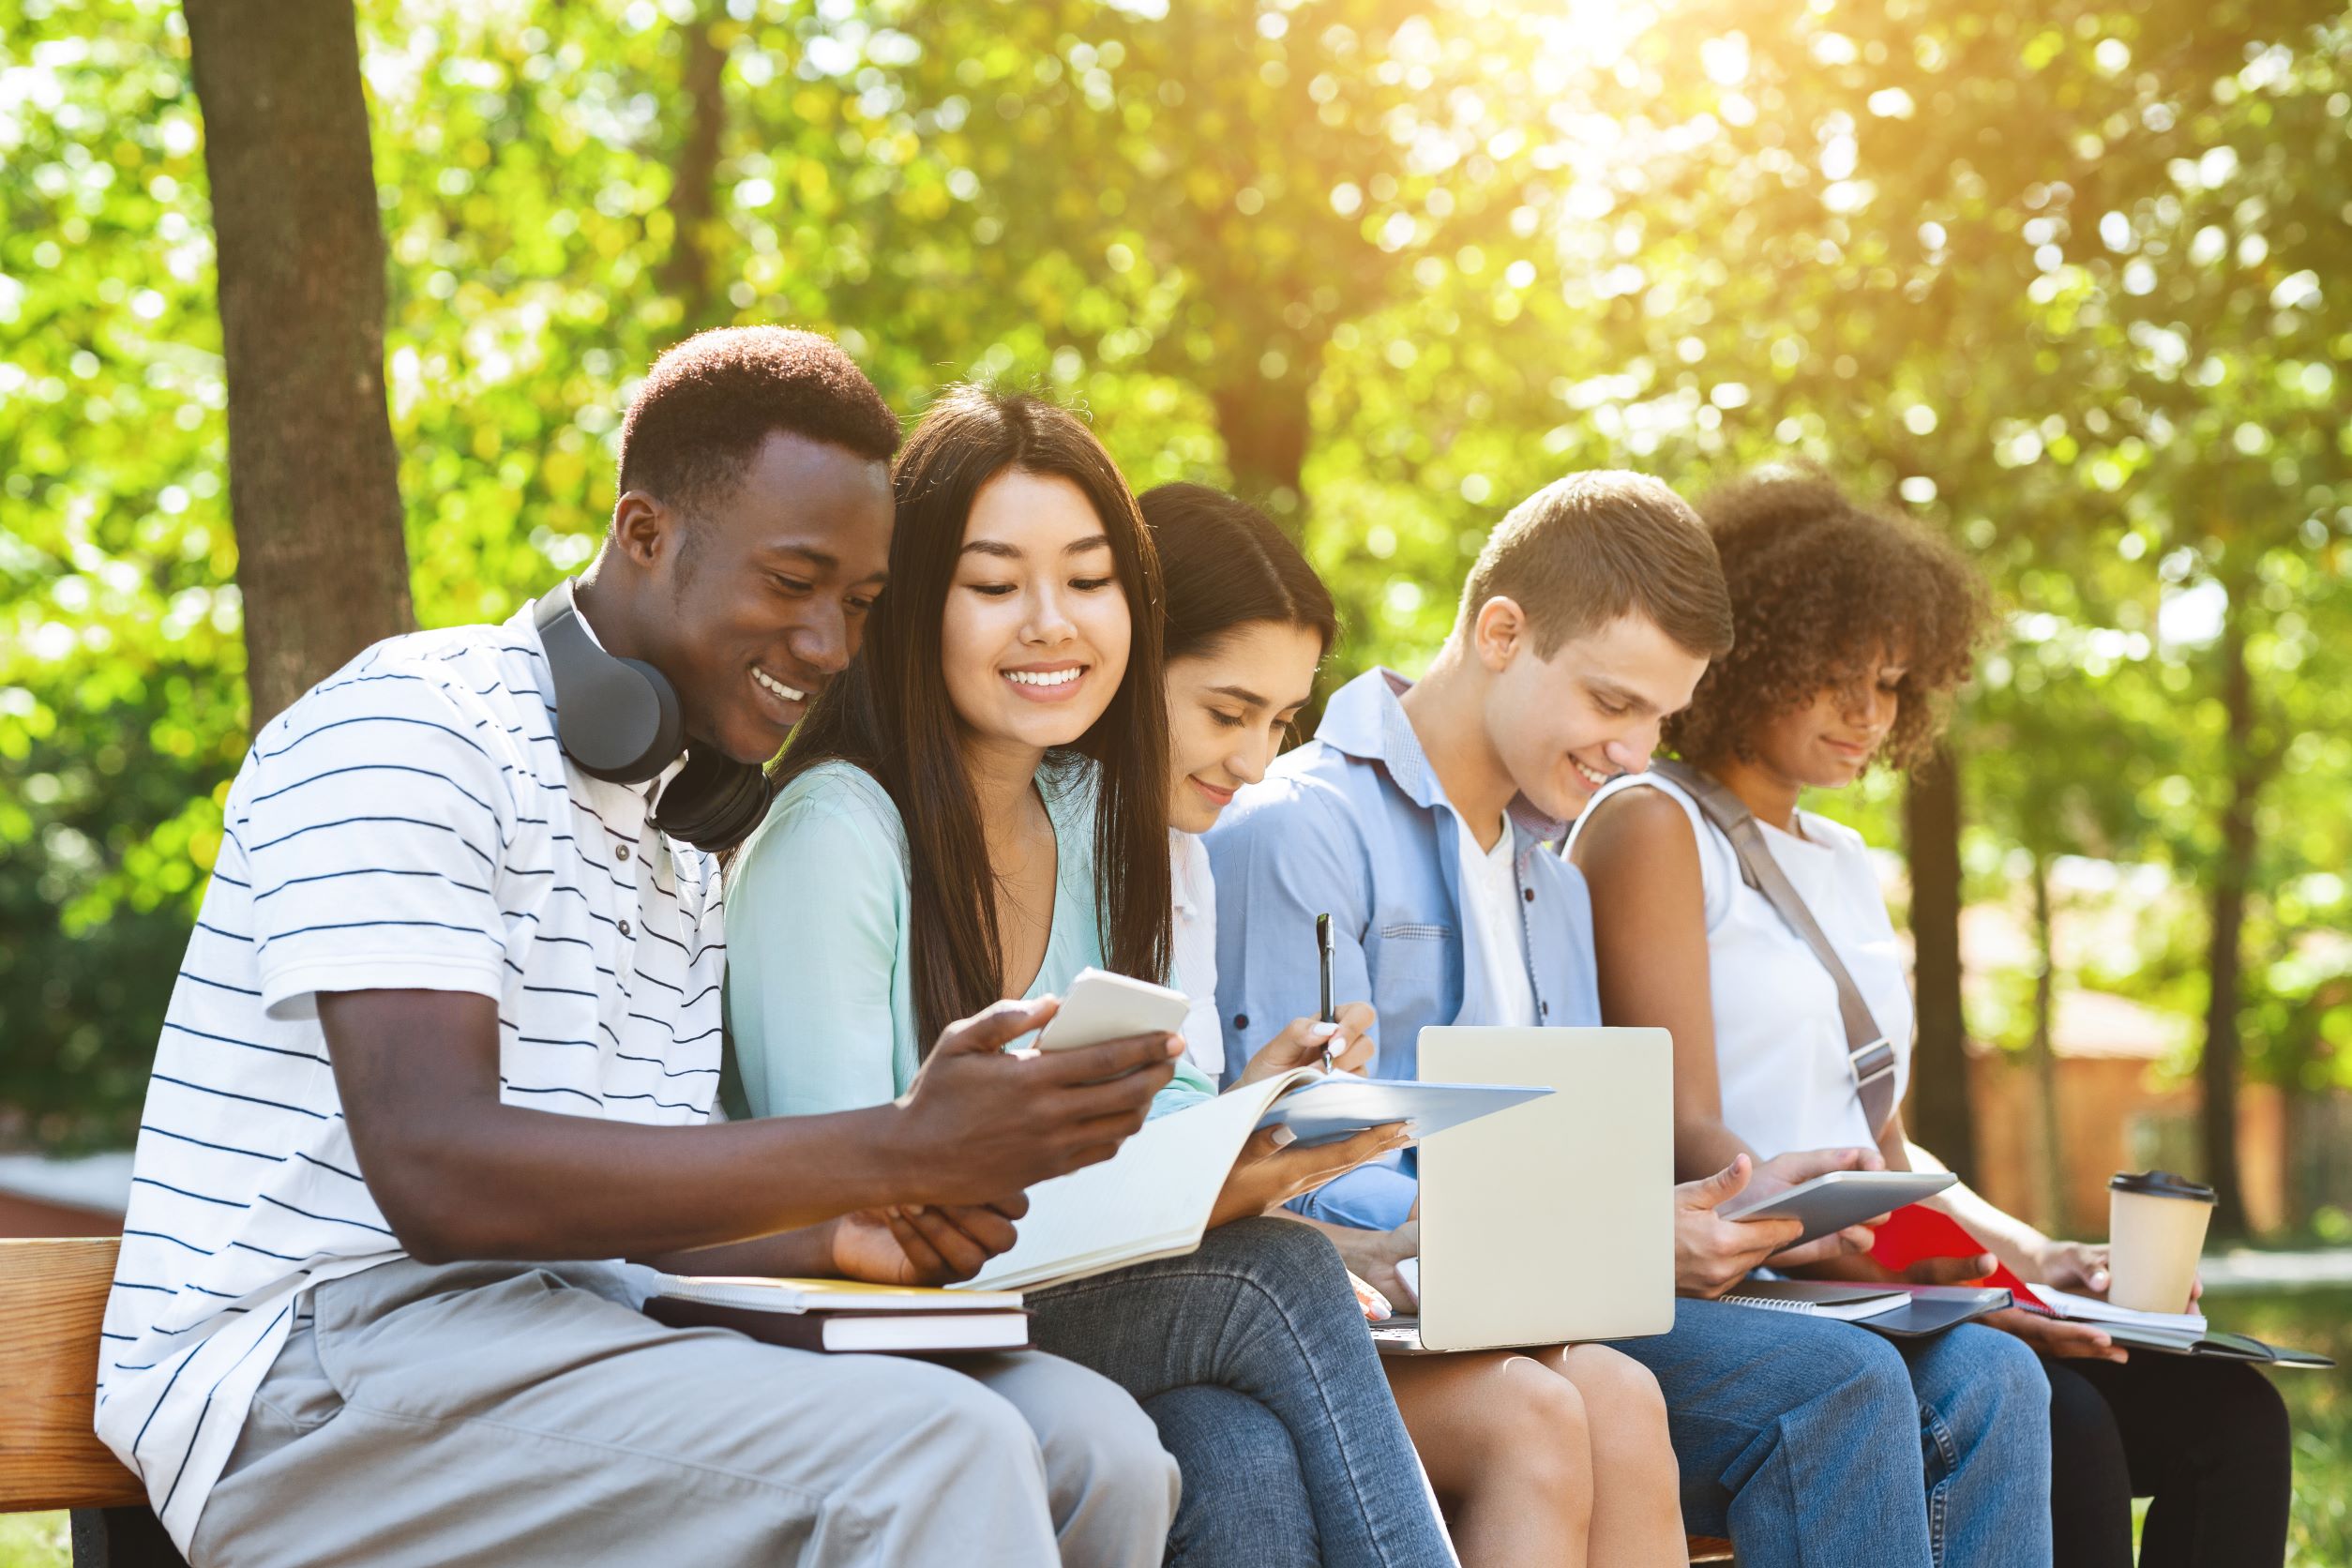 Group of young people sits outside on their devices